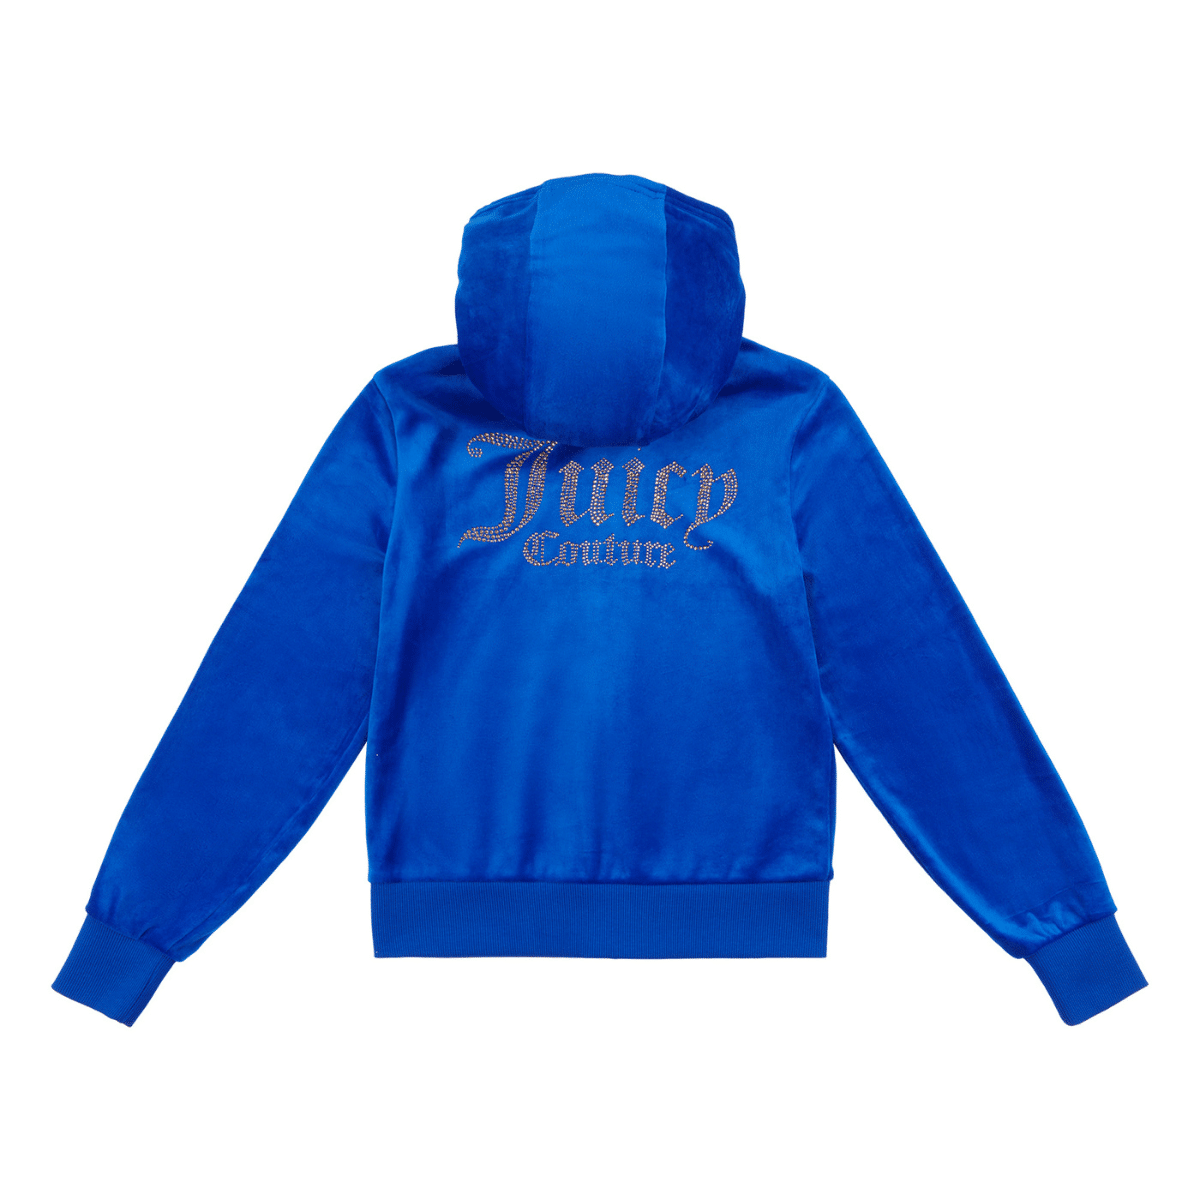 juicy couture girls blue velour hoodie back view